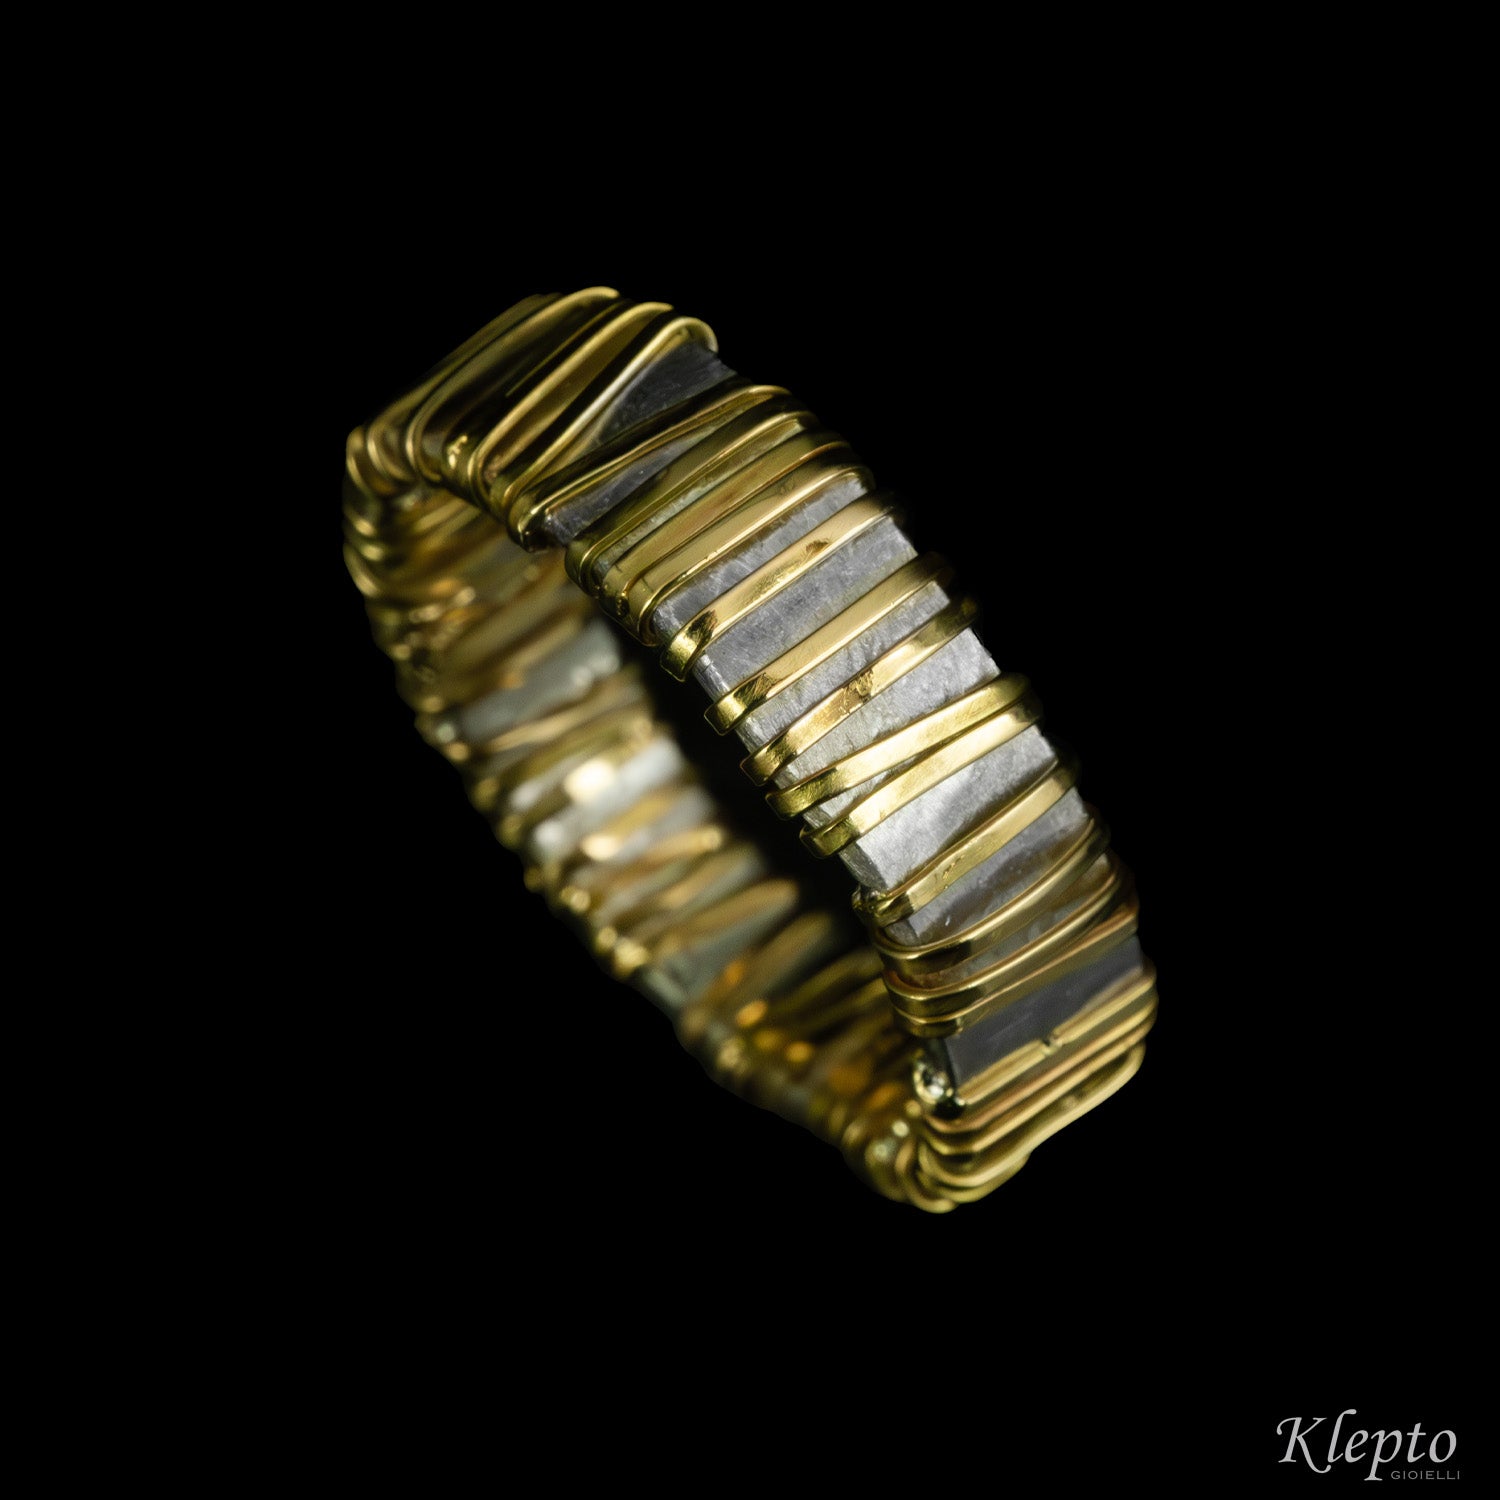 Ring in Silnova® Silver and yellow gold